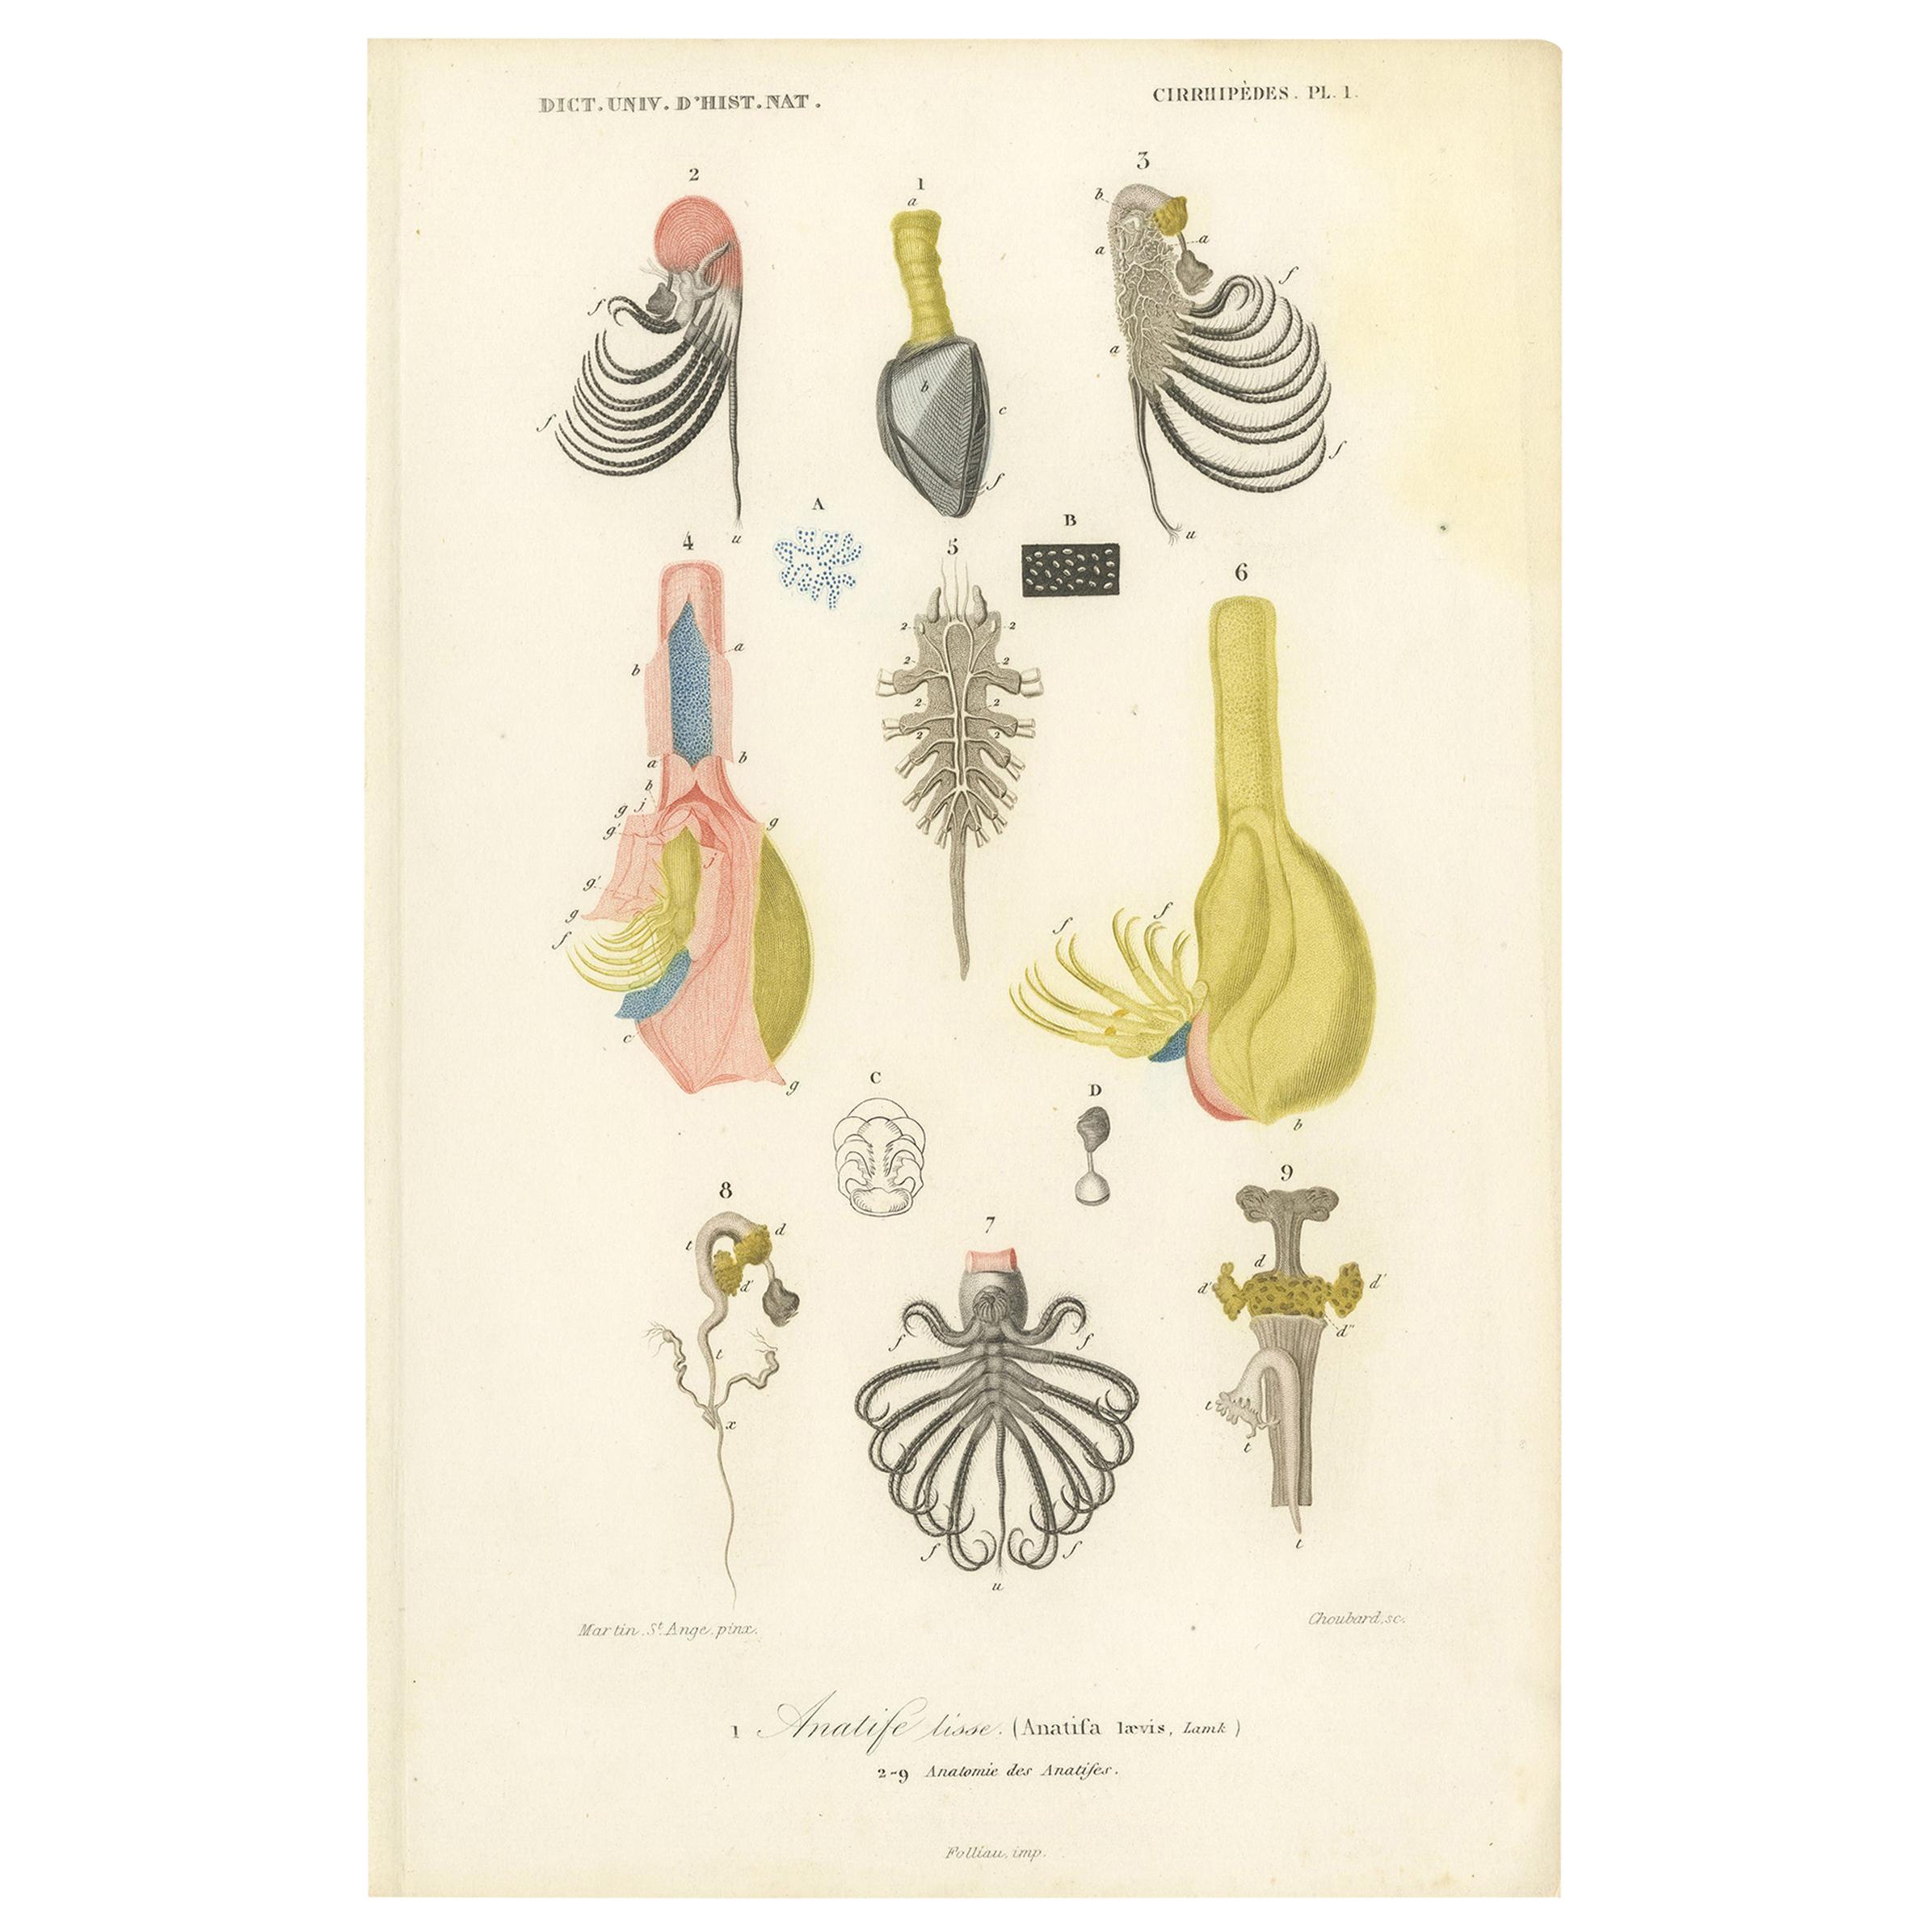 Antique Print of the Pelagic Gooseneck Barnacle by Orbigny '1849' For Sale